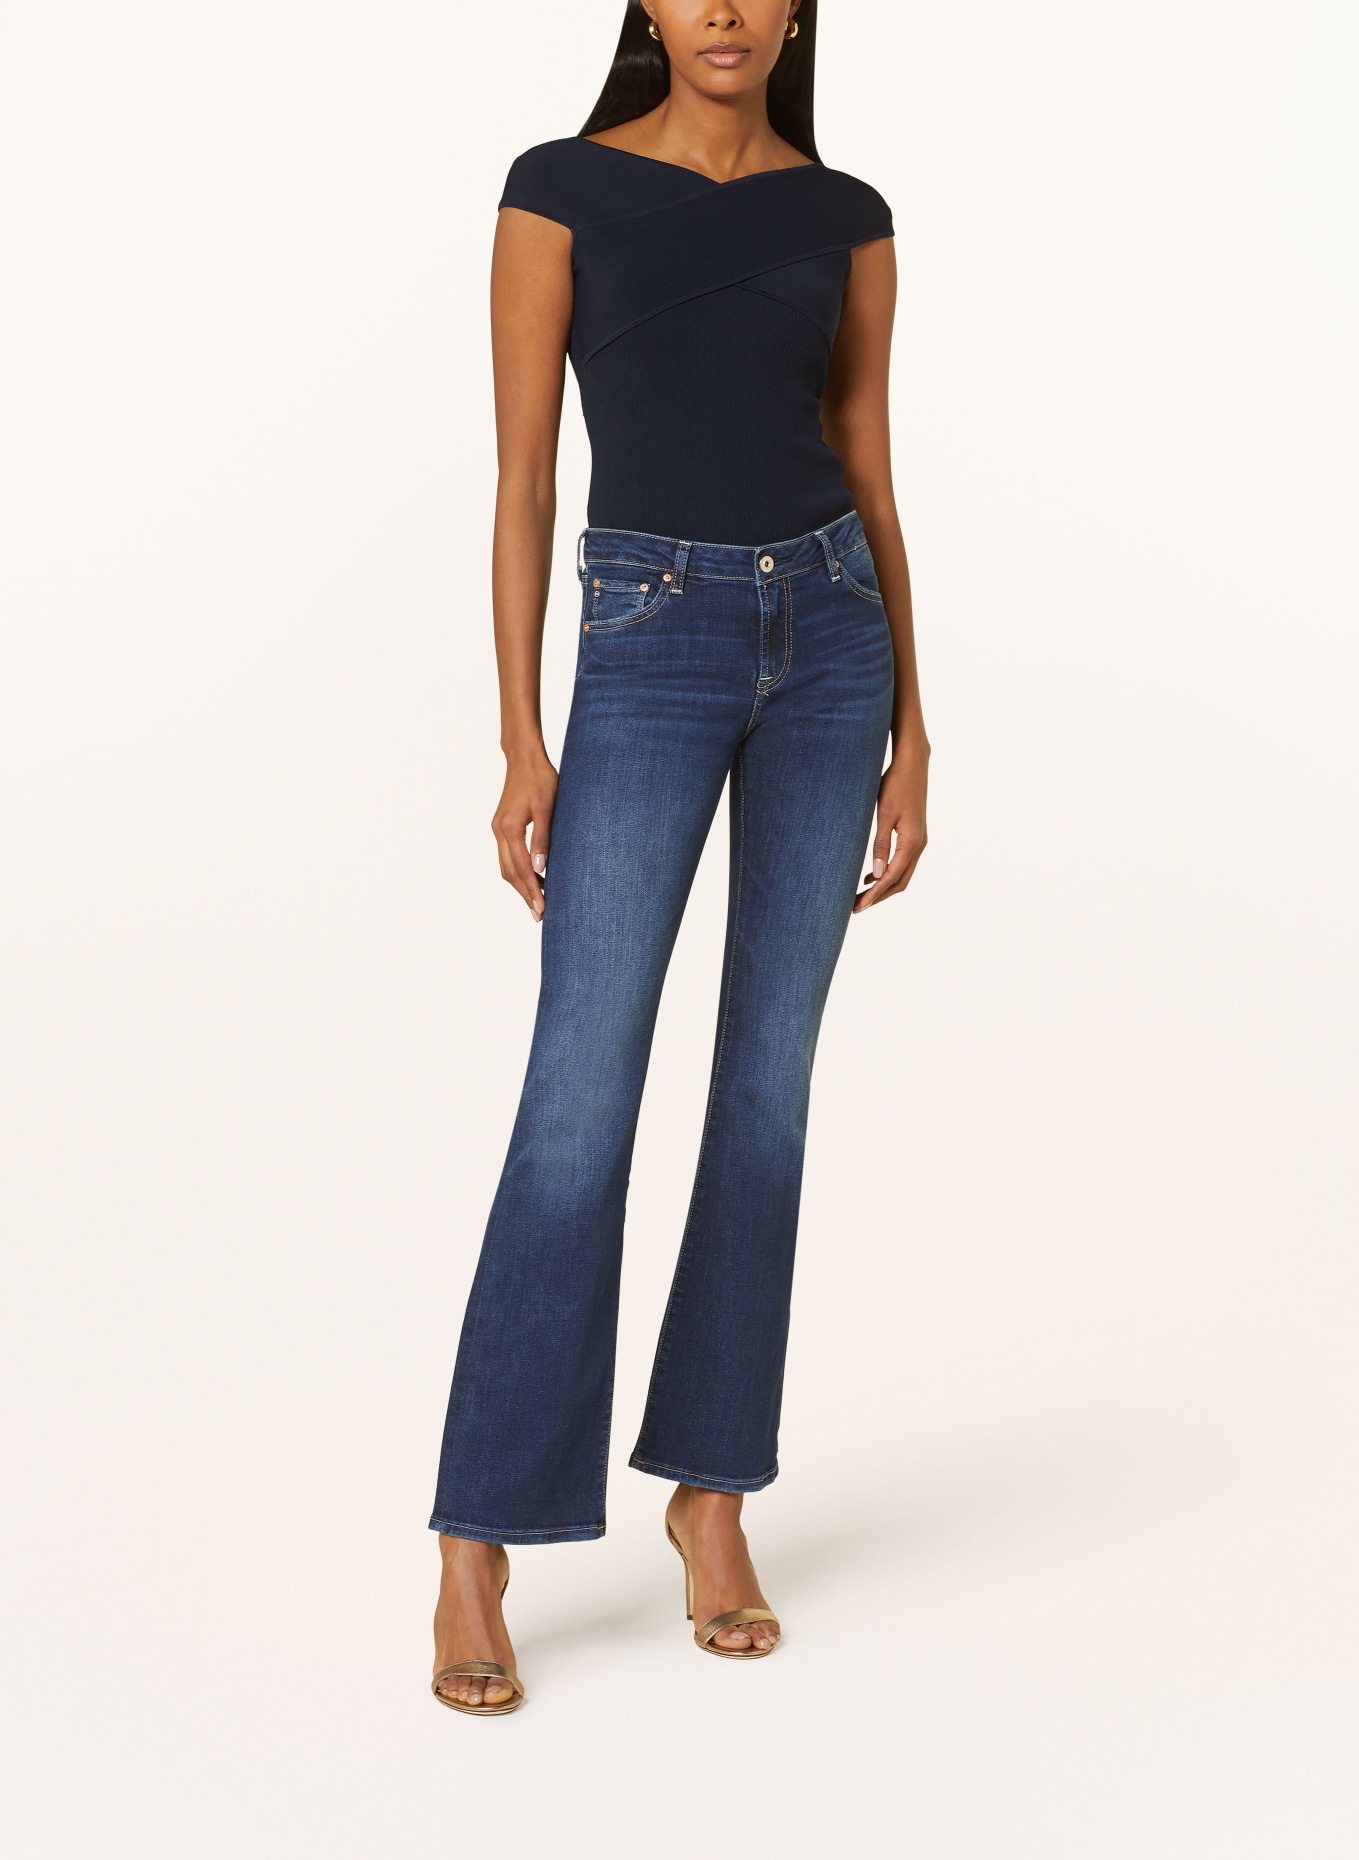 MICHAEL KORS Knit body, Color: 409 MIDNIGHT BLUE (Image 2)